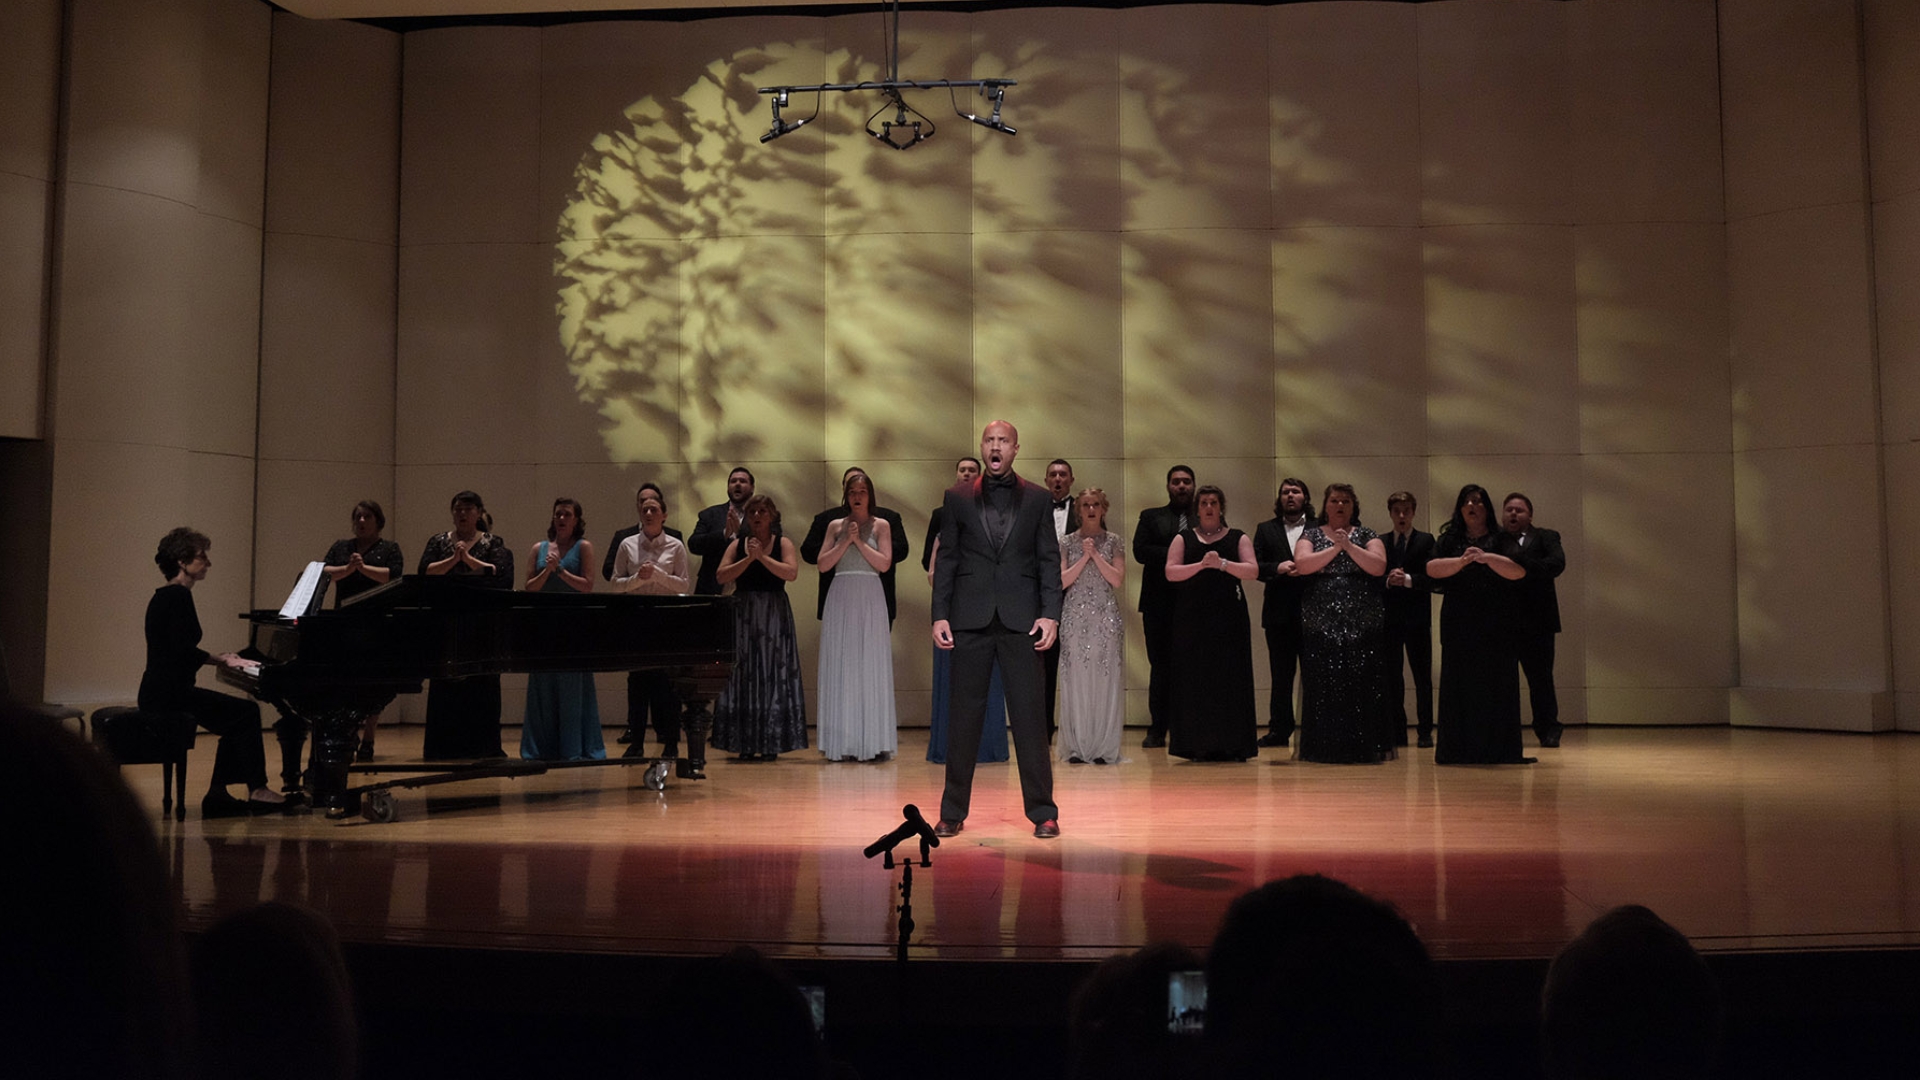 Baritone singer Eugene Richards sings for a performance of the Dolora Zajick Institute for Young Dramatic Voices.